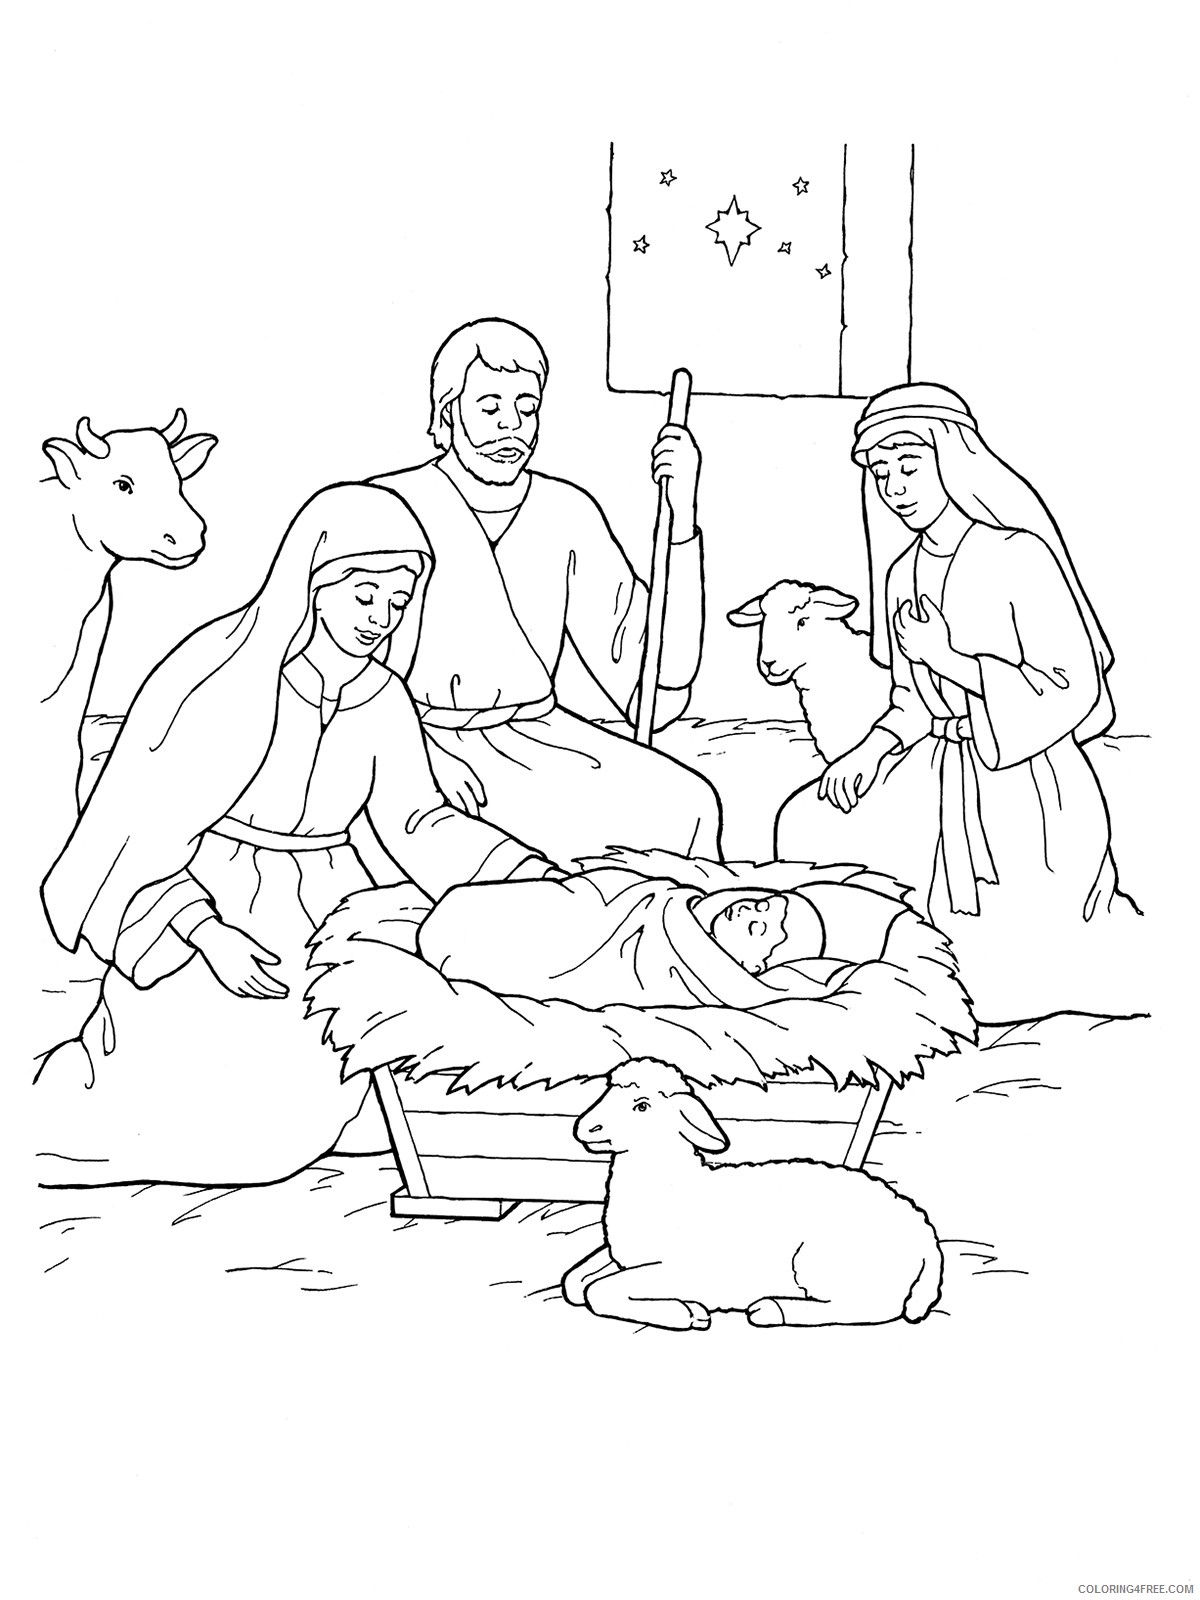 nativity coloring pages born of jesus christ Coloring4free